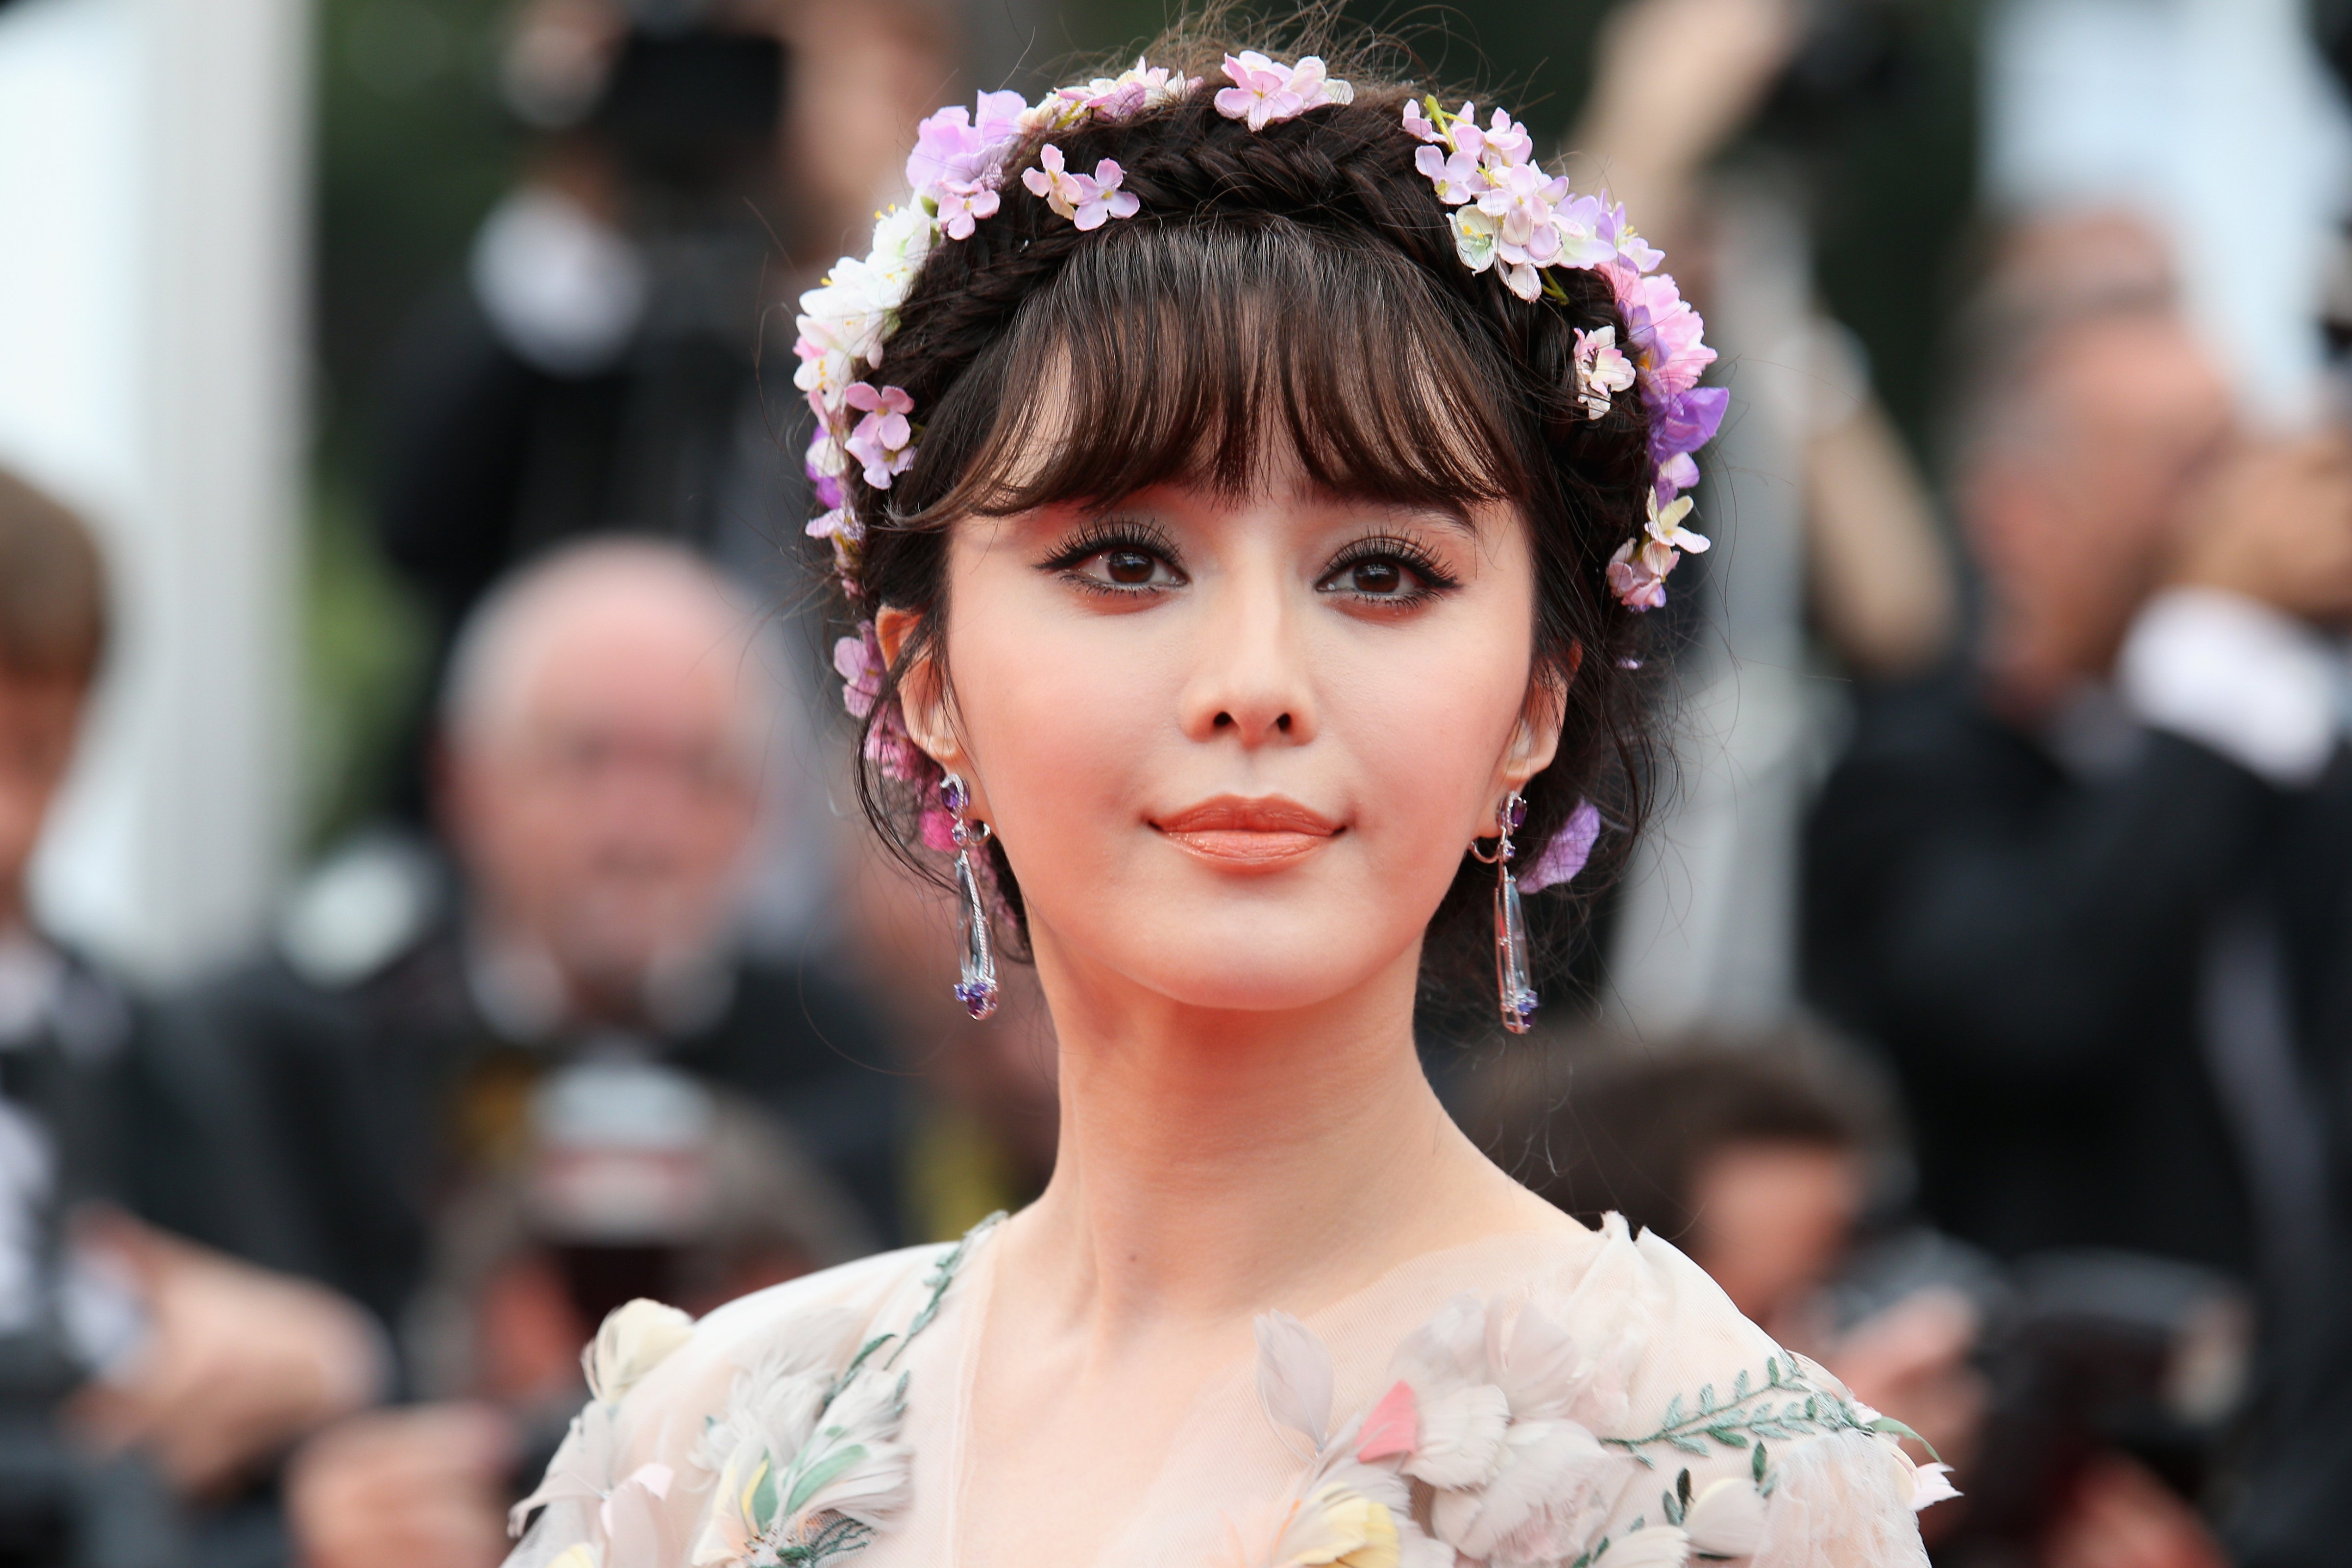 Actress Fan Bingbing attends Premiere of "Mad Max: Fury Road" during the 68th annual Cannes Film Festival on May 14, 2015 in Cannes, France. (Gisela Schober—Getty Images)